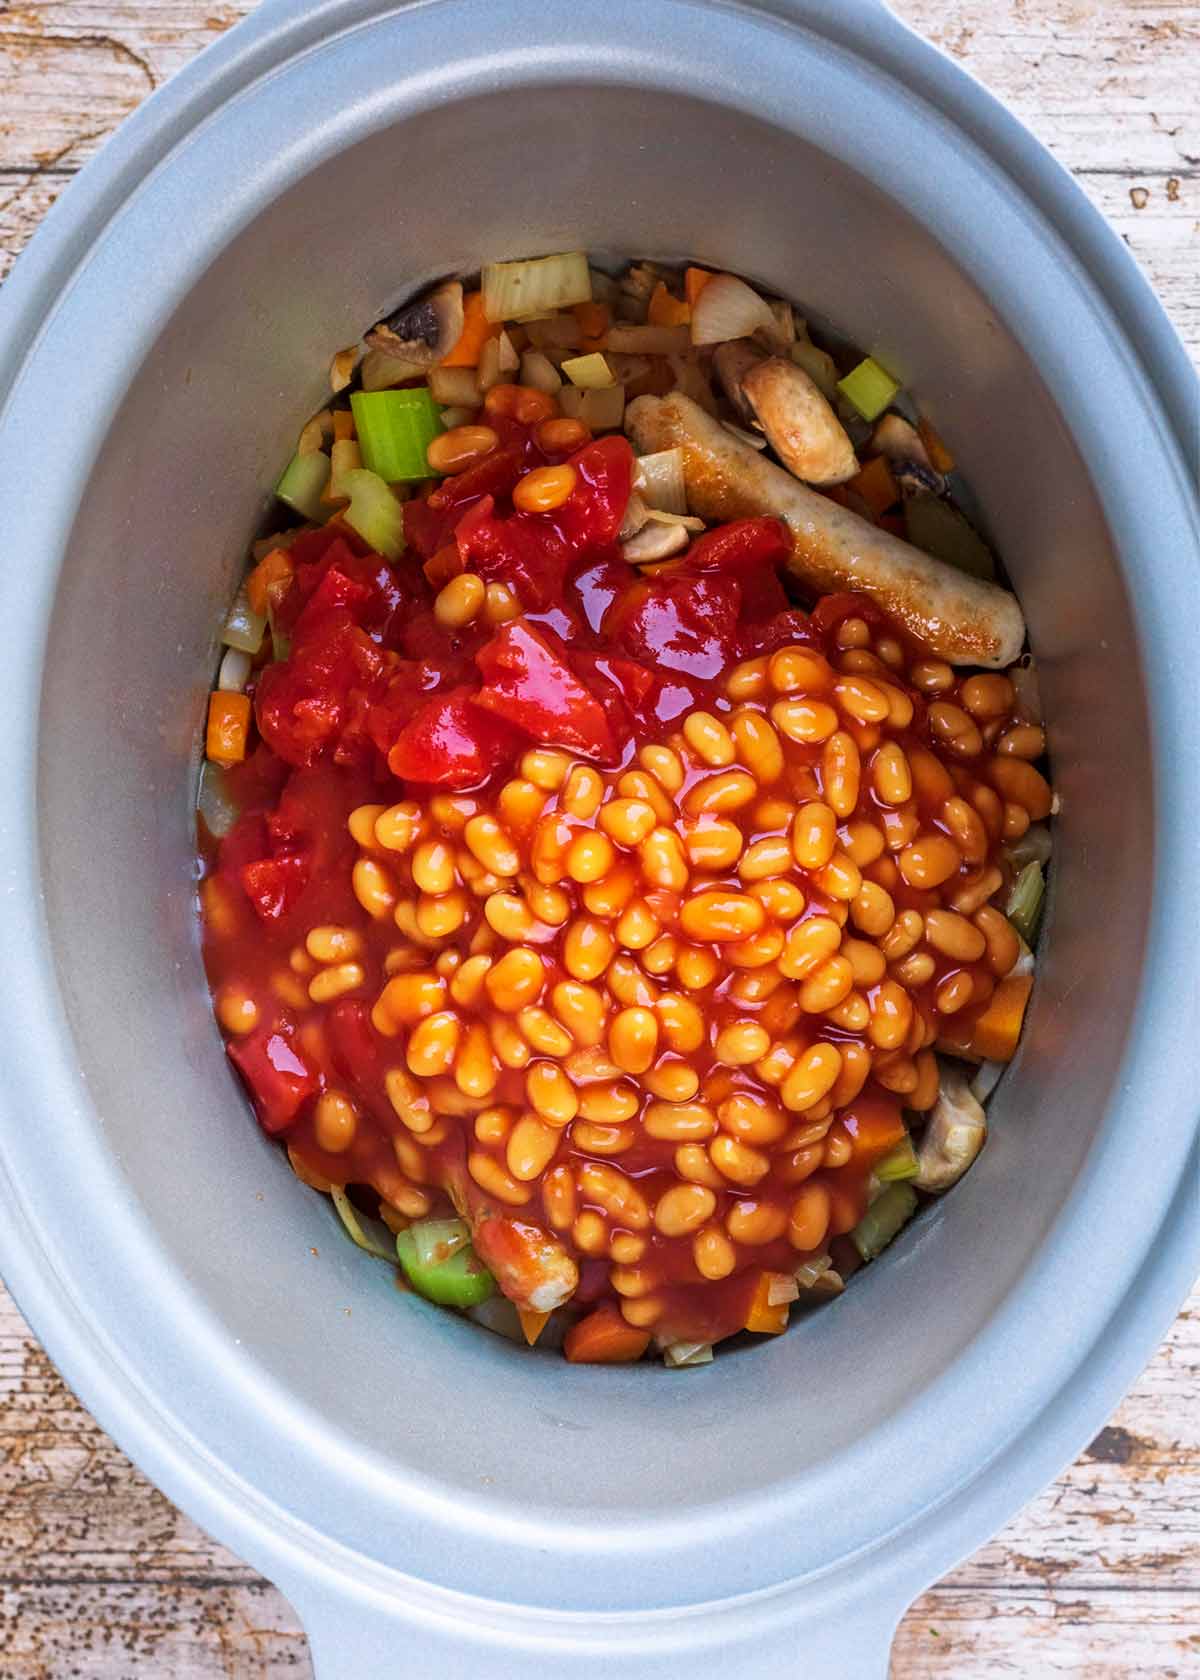 Chopped tomatoes and baked beans added to the slow cooker.